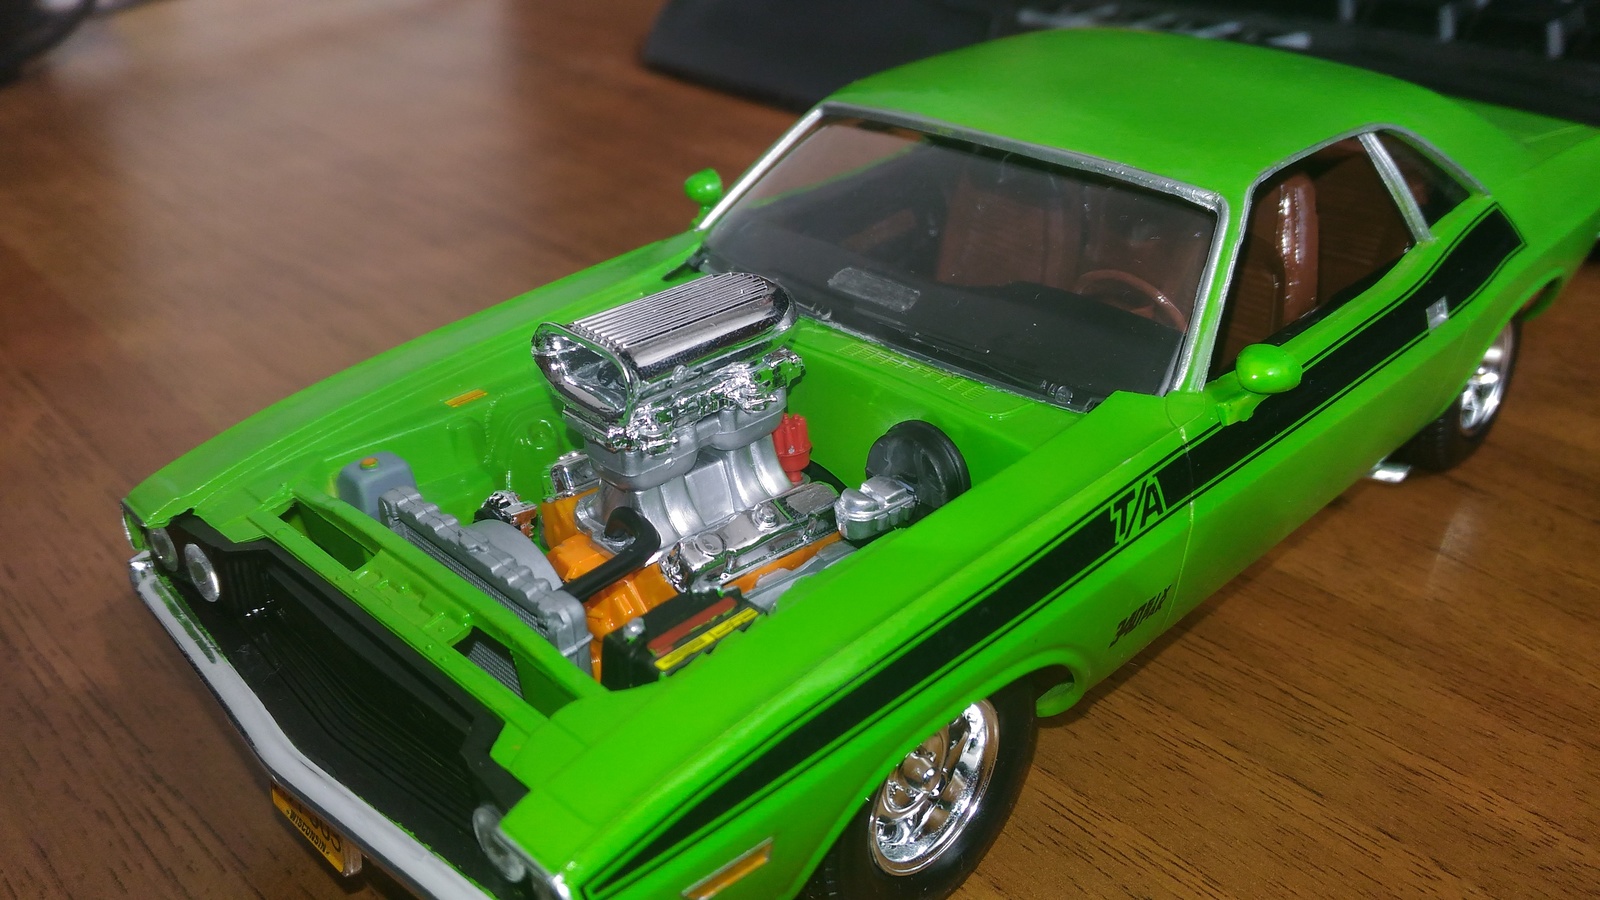 Our hands are not for boredom, part 2. We continue to build the dream garage. - My, Longpost, Modeling, Revell, Scale model, Dodge challenger, Prefabricated model